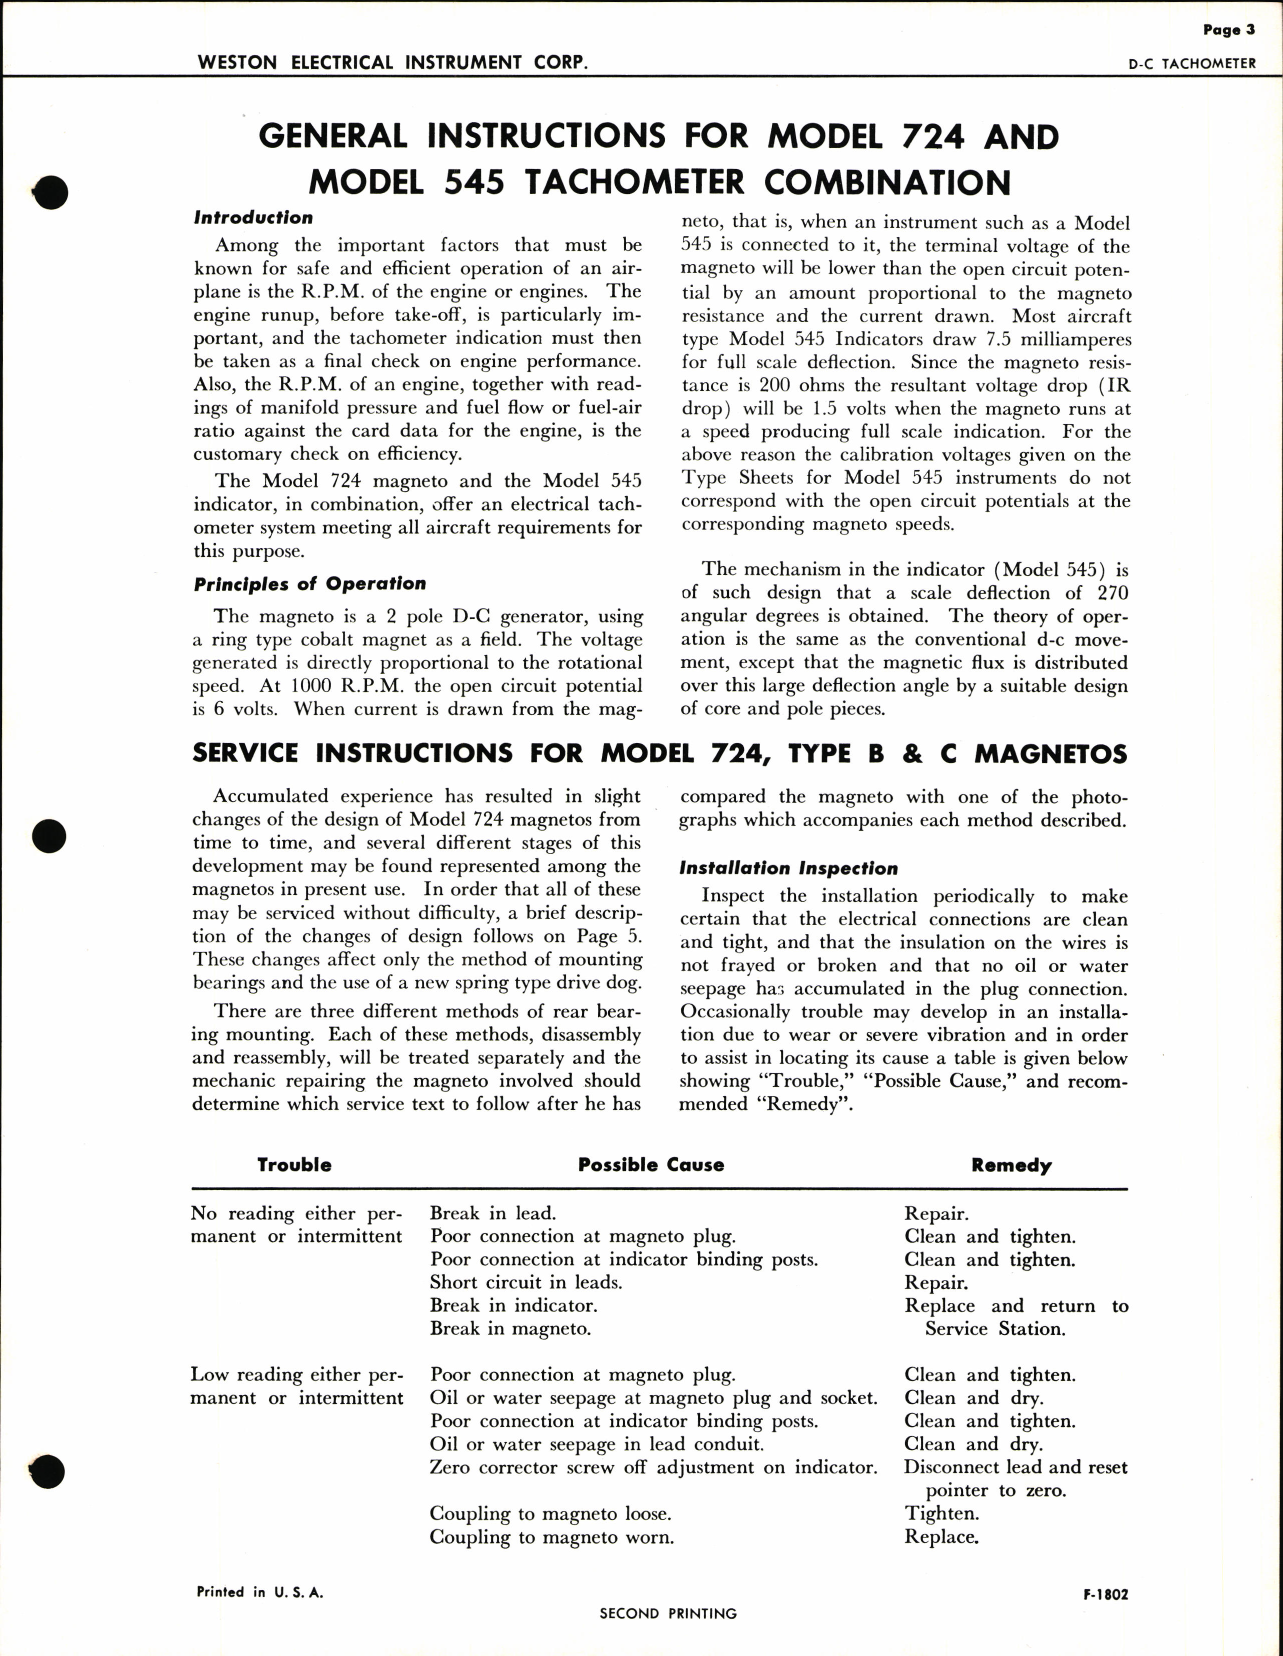 Sample page 3 from AirCorps Library document: Service Instructions for D-C Tachometer 724 Mag & 545 Indicator